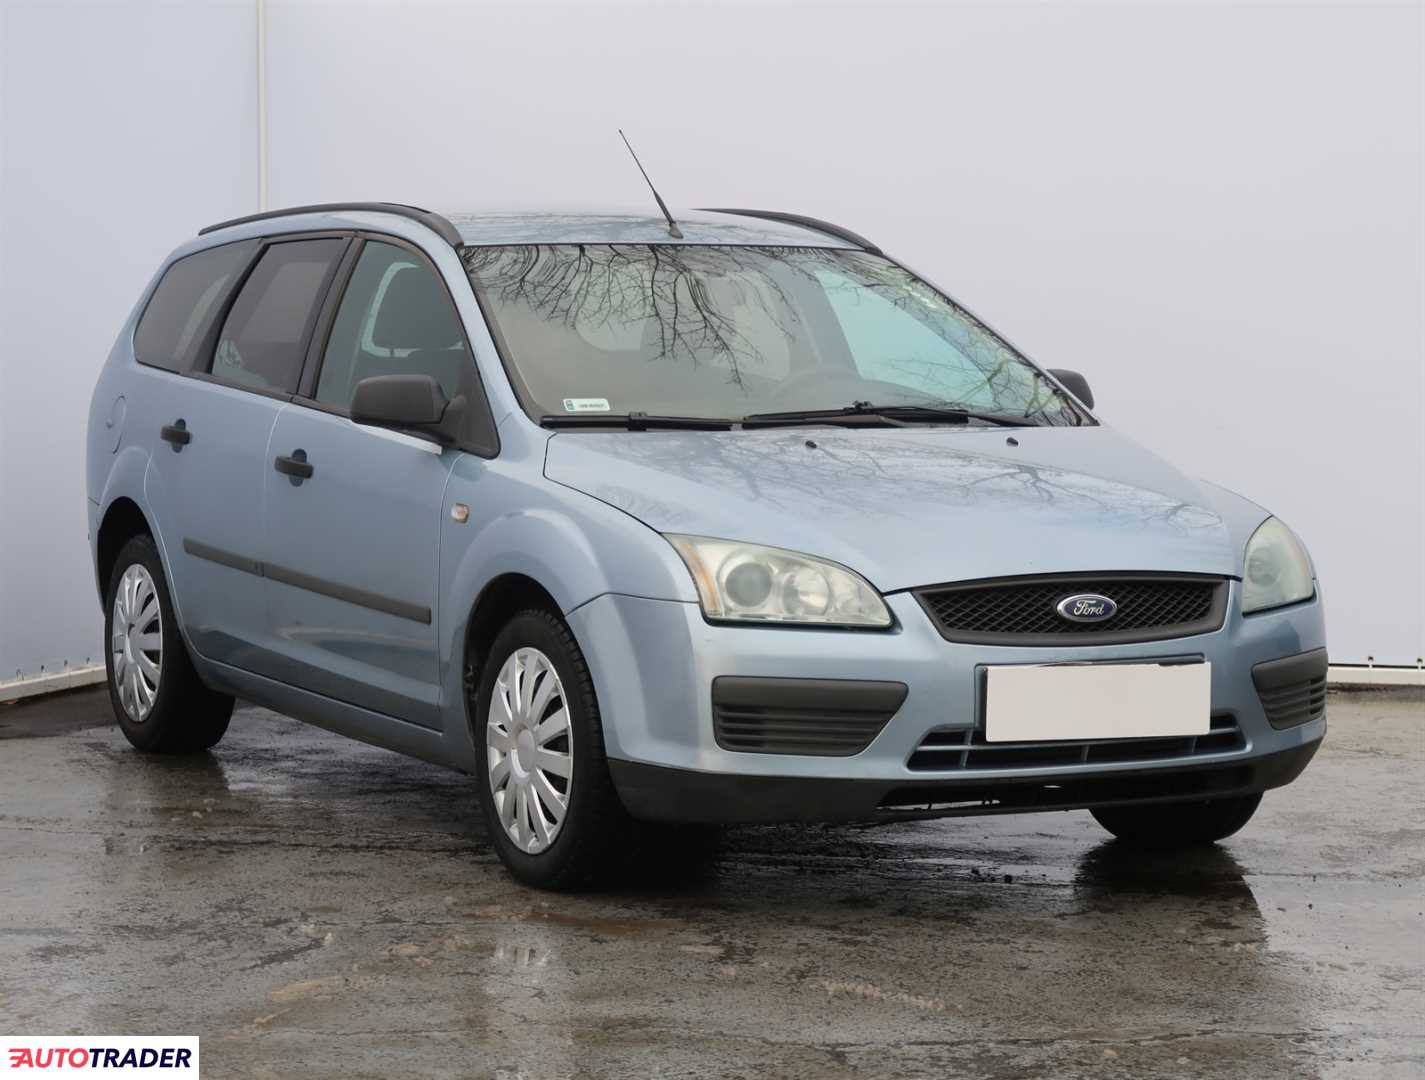 Ford Focus 2005 1.6 107 KM